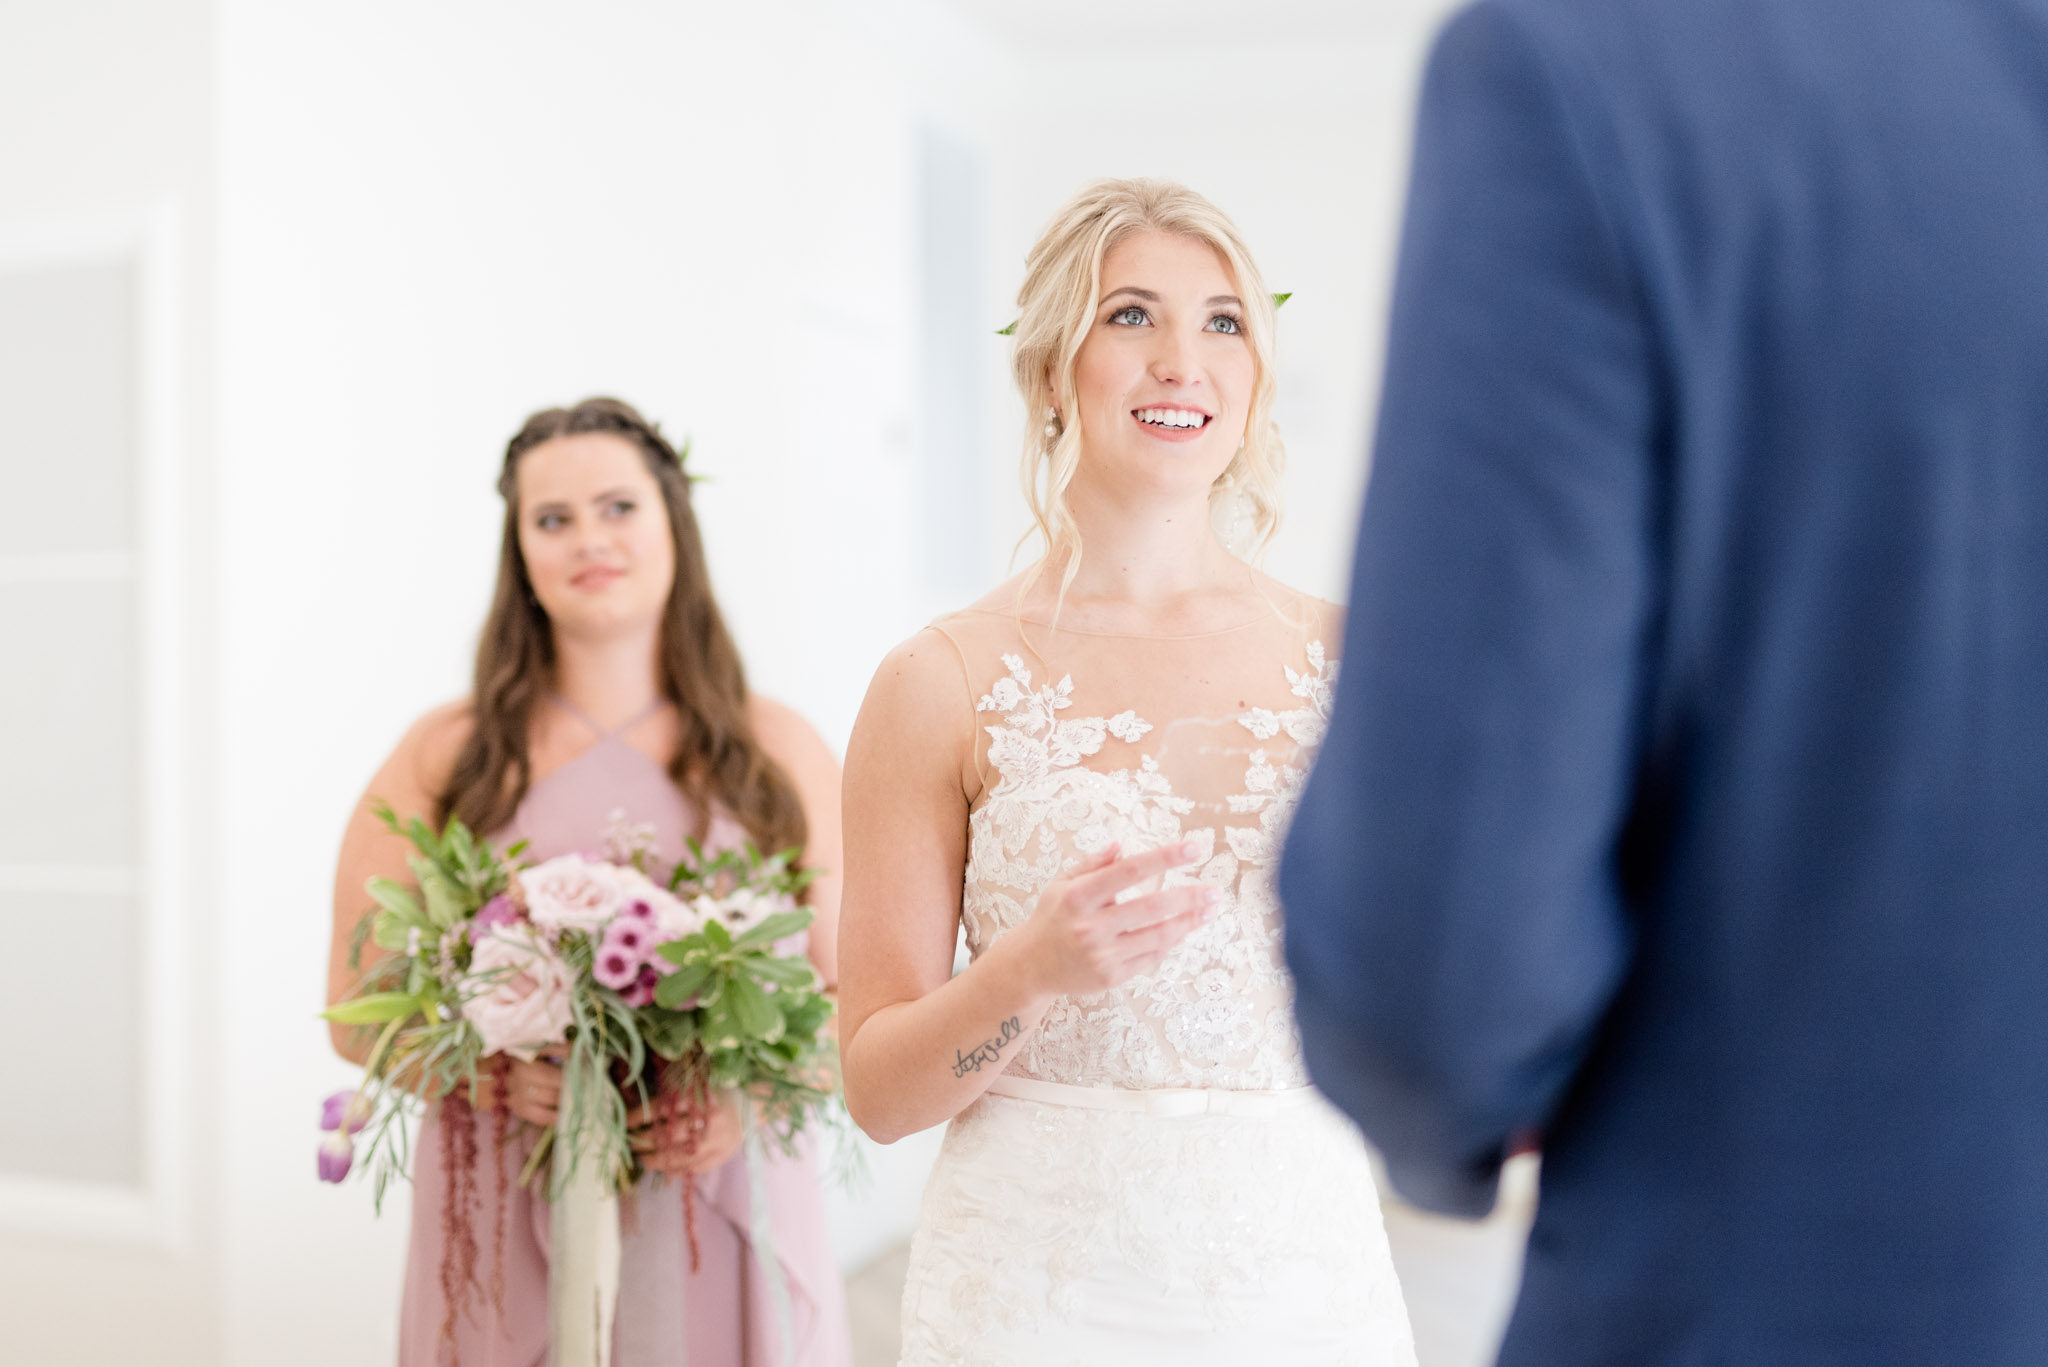 Bride smiles at groom during ceremony.